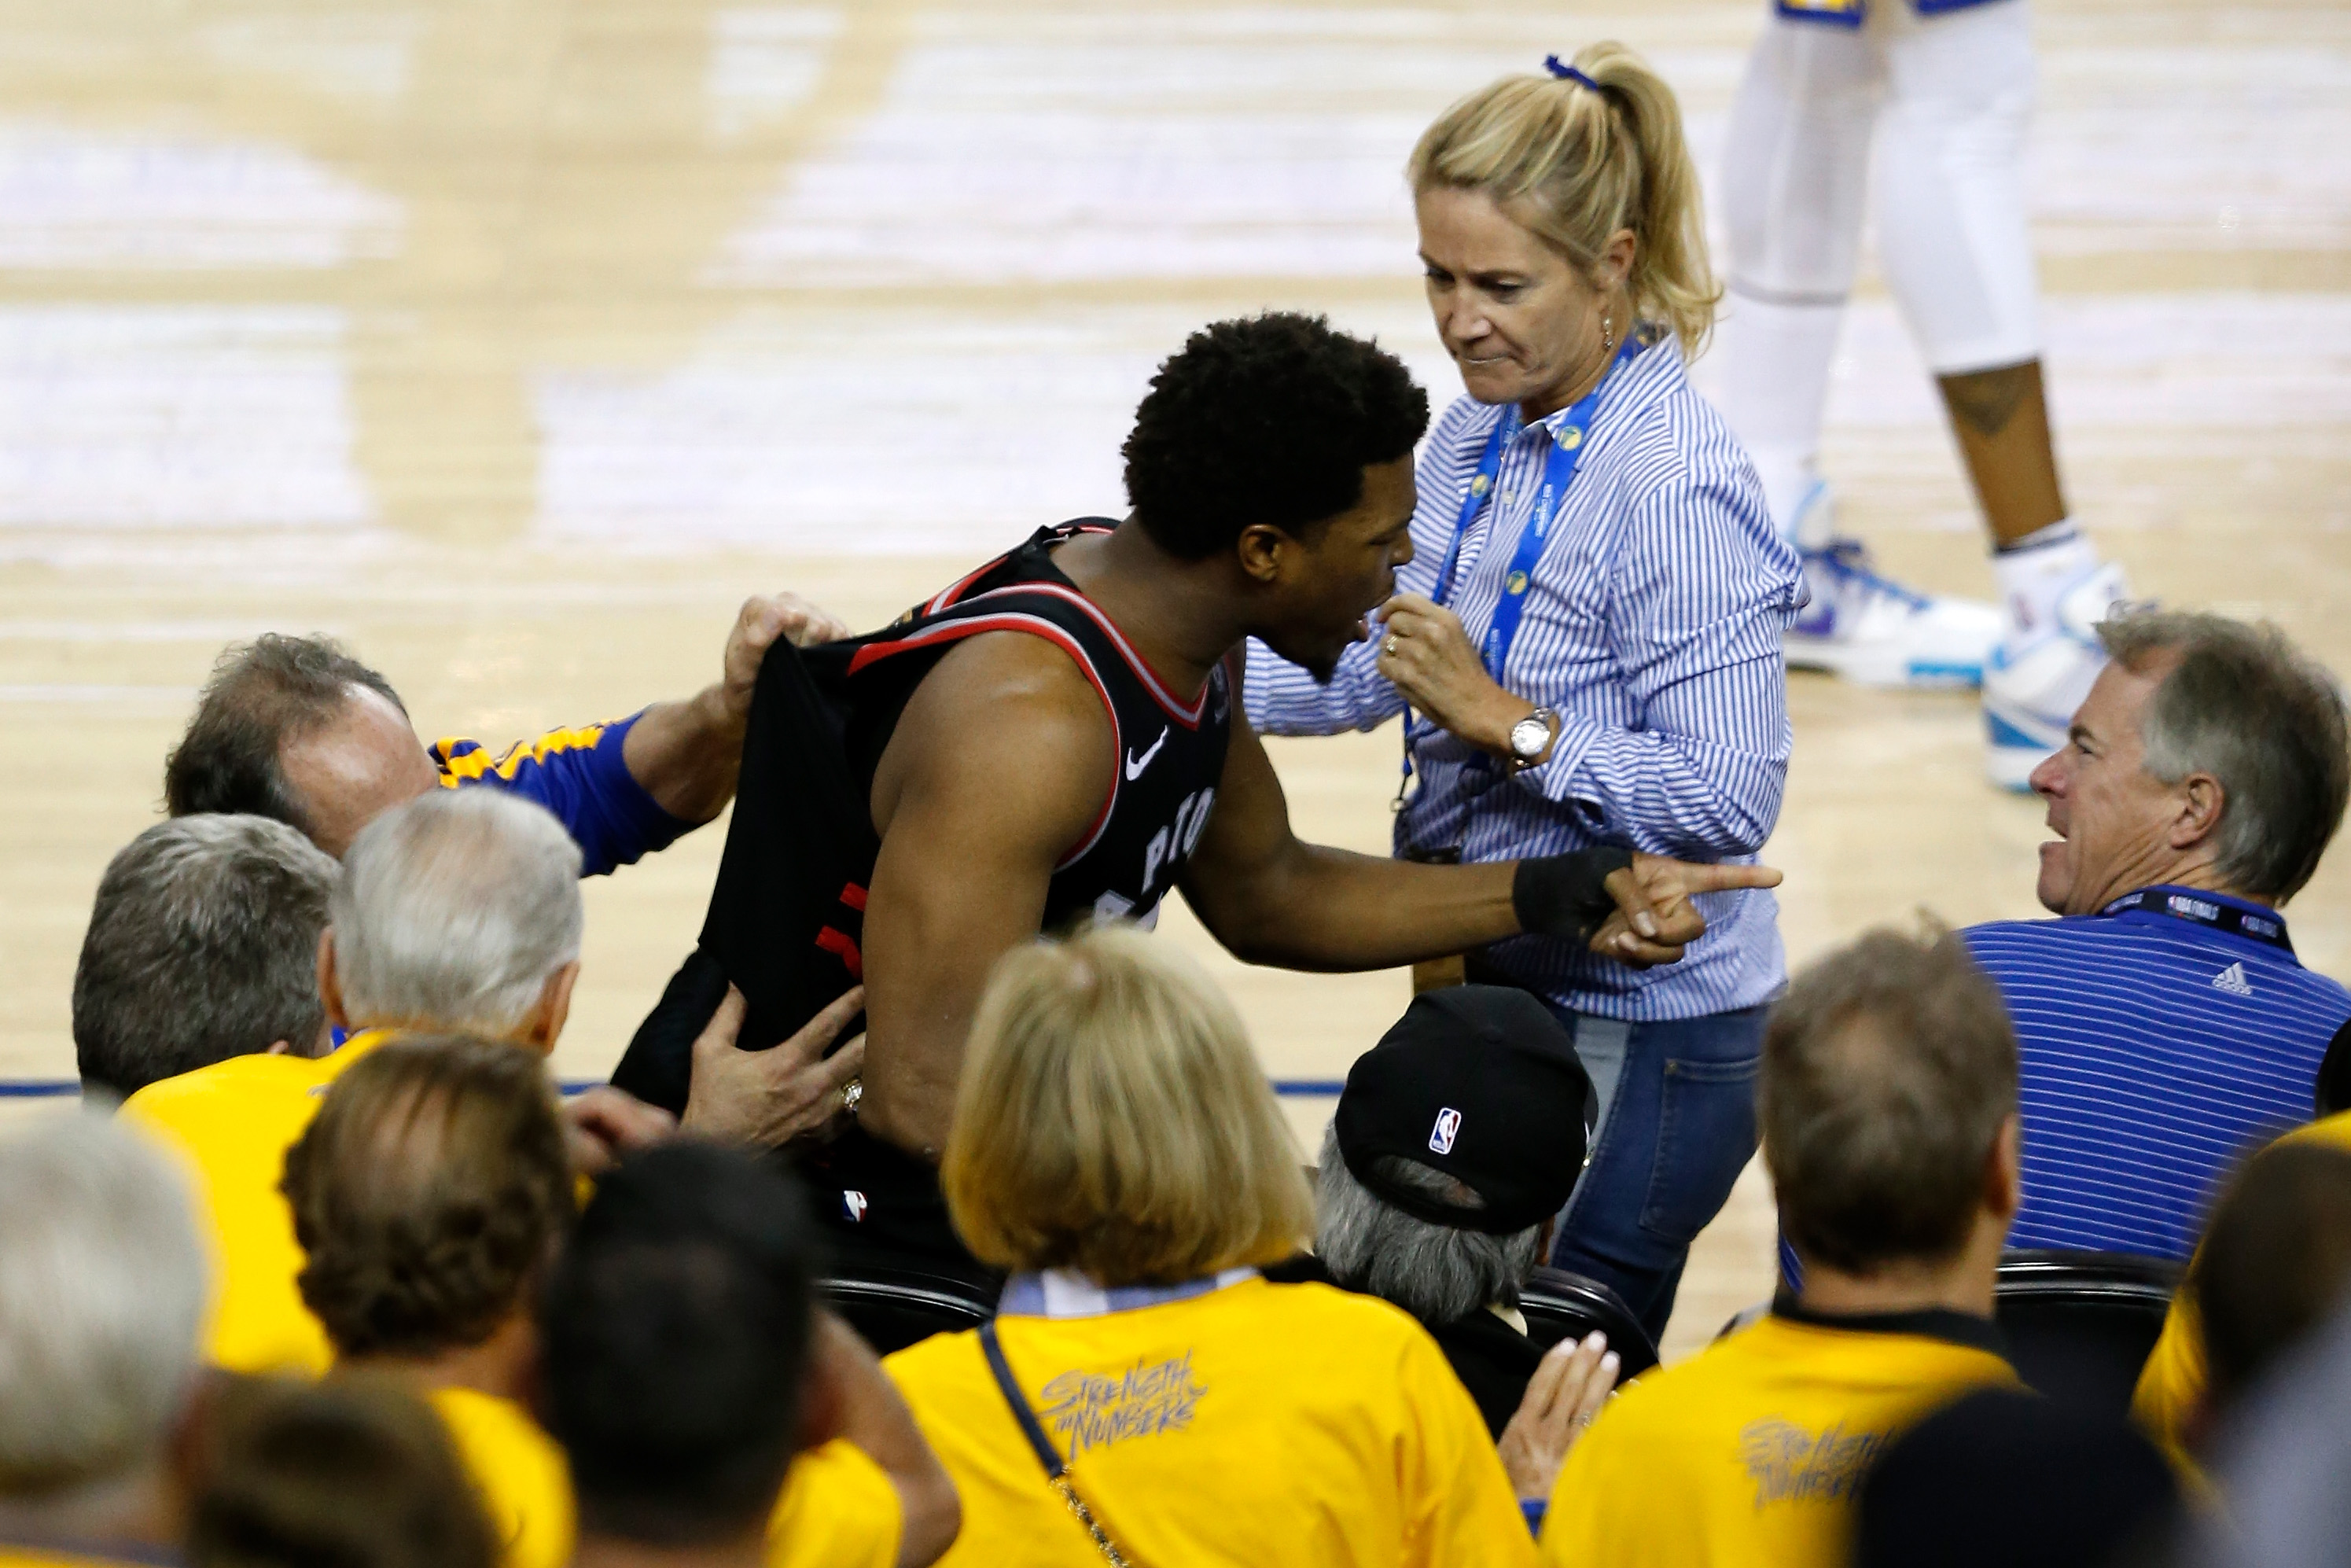 Kyle Lowry #7 of the Toronto Raptors argues with Warriors minority investor Mark Stevens  after Lowry chased down a loose ball in the second half against the Golden State Warriors during Game Three of the 2019 NBA Finals at ORACLE Arena on June 05, 2019 in Oakland, California. (Photo by Lachlan Cunningham/Getty Images) (Lachlan Cunningham&amp;Getty Images)